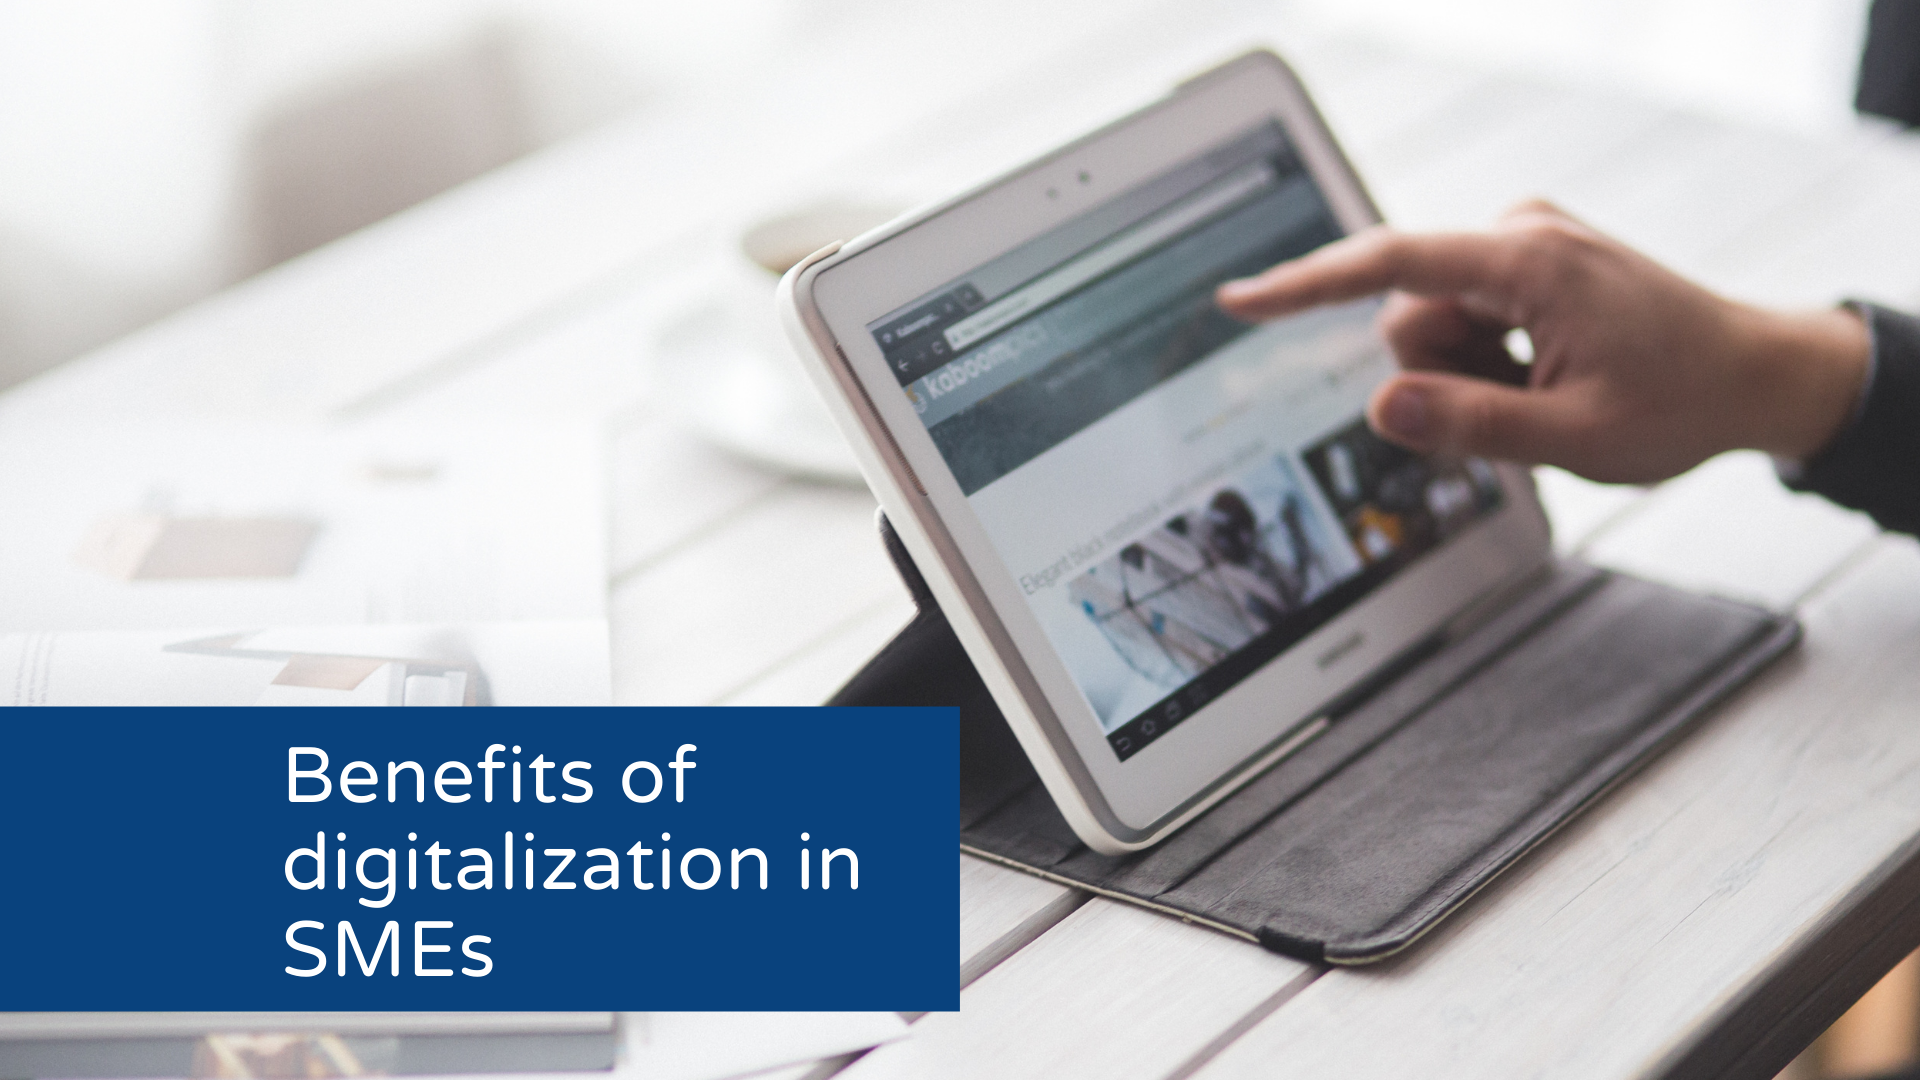 Benefits of digitalization in SMEs